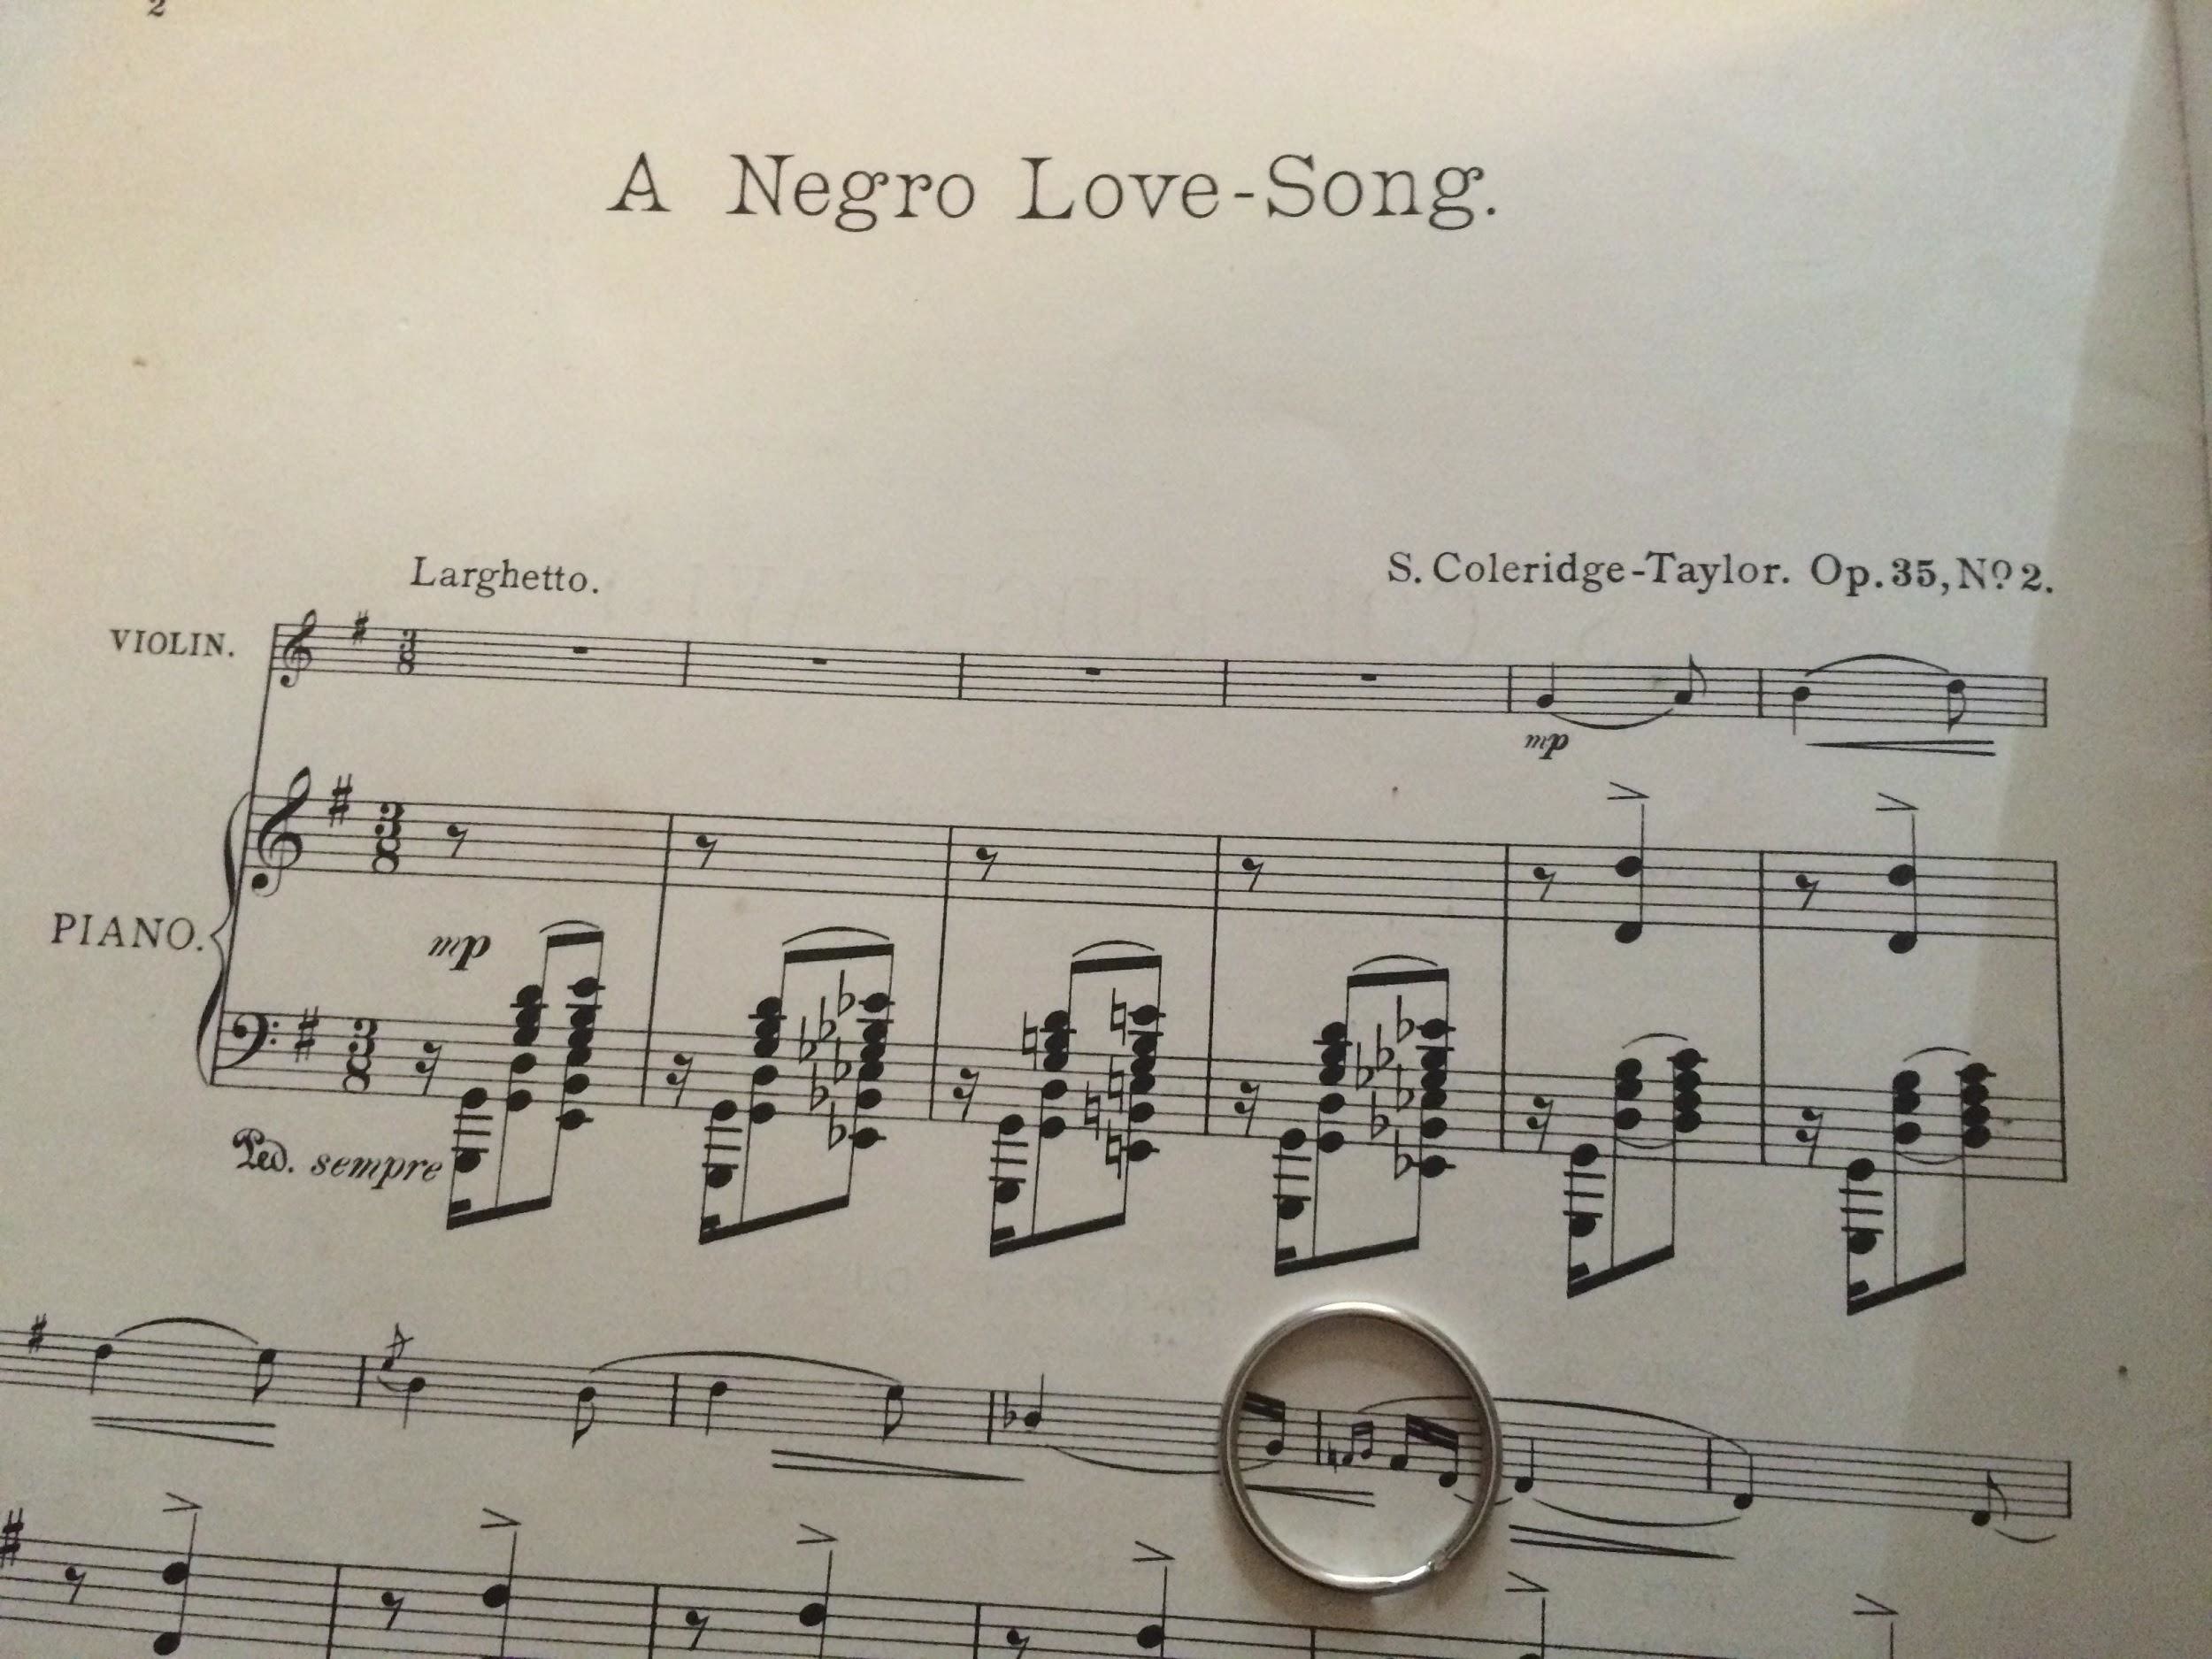 S.C.-T.’s “Negro Love-Song,” with flatted 7th circled